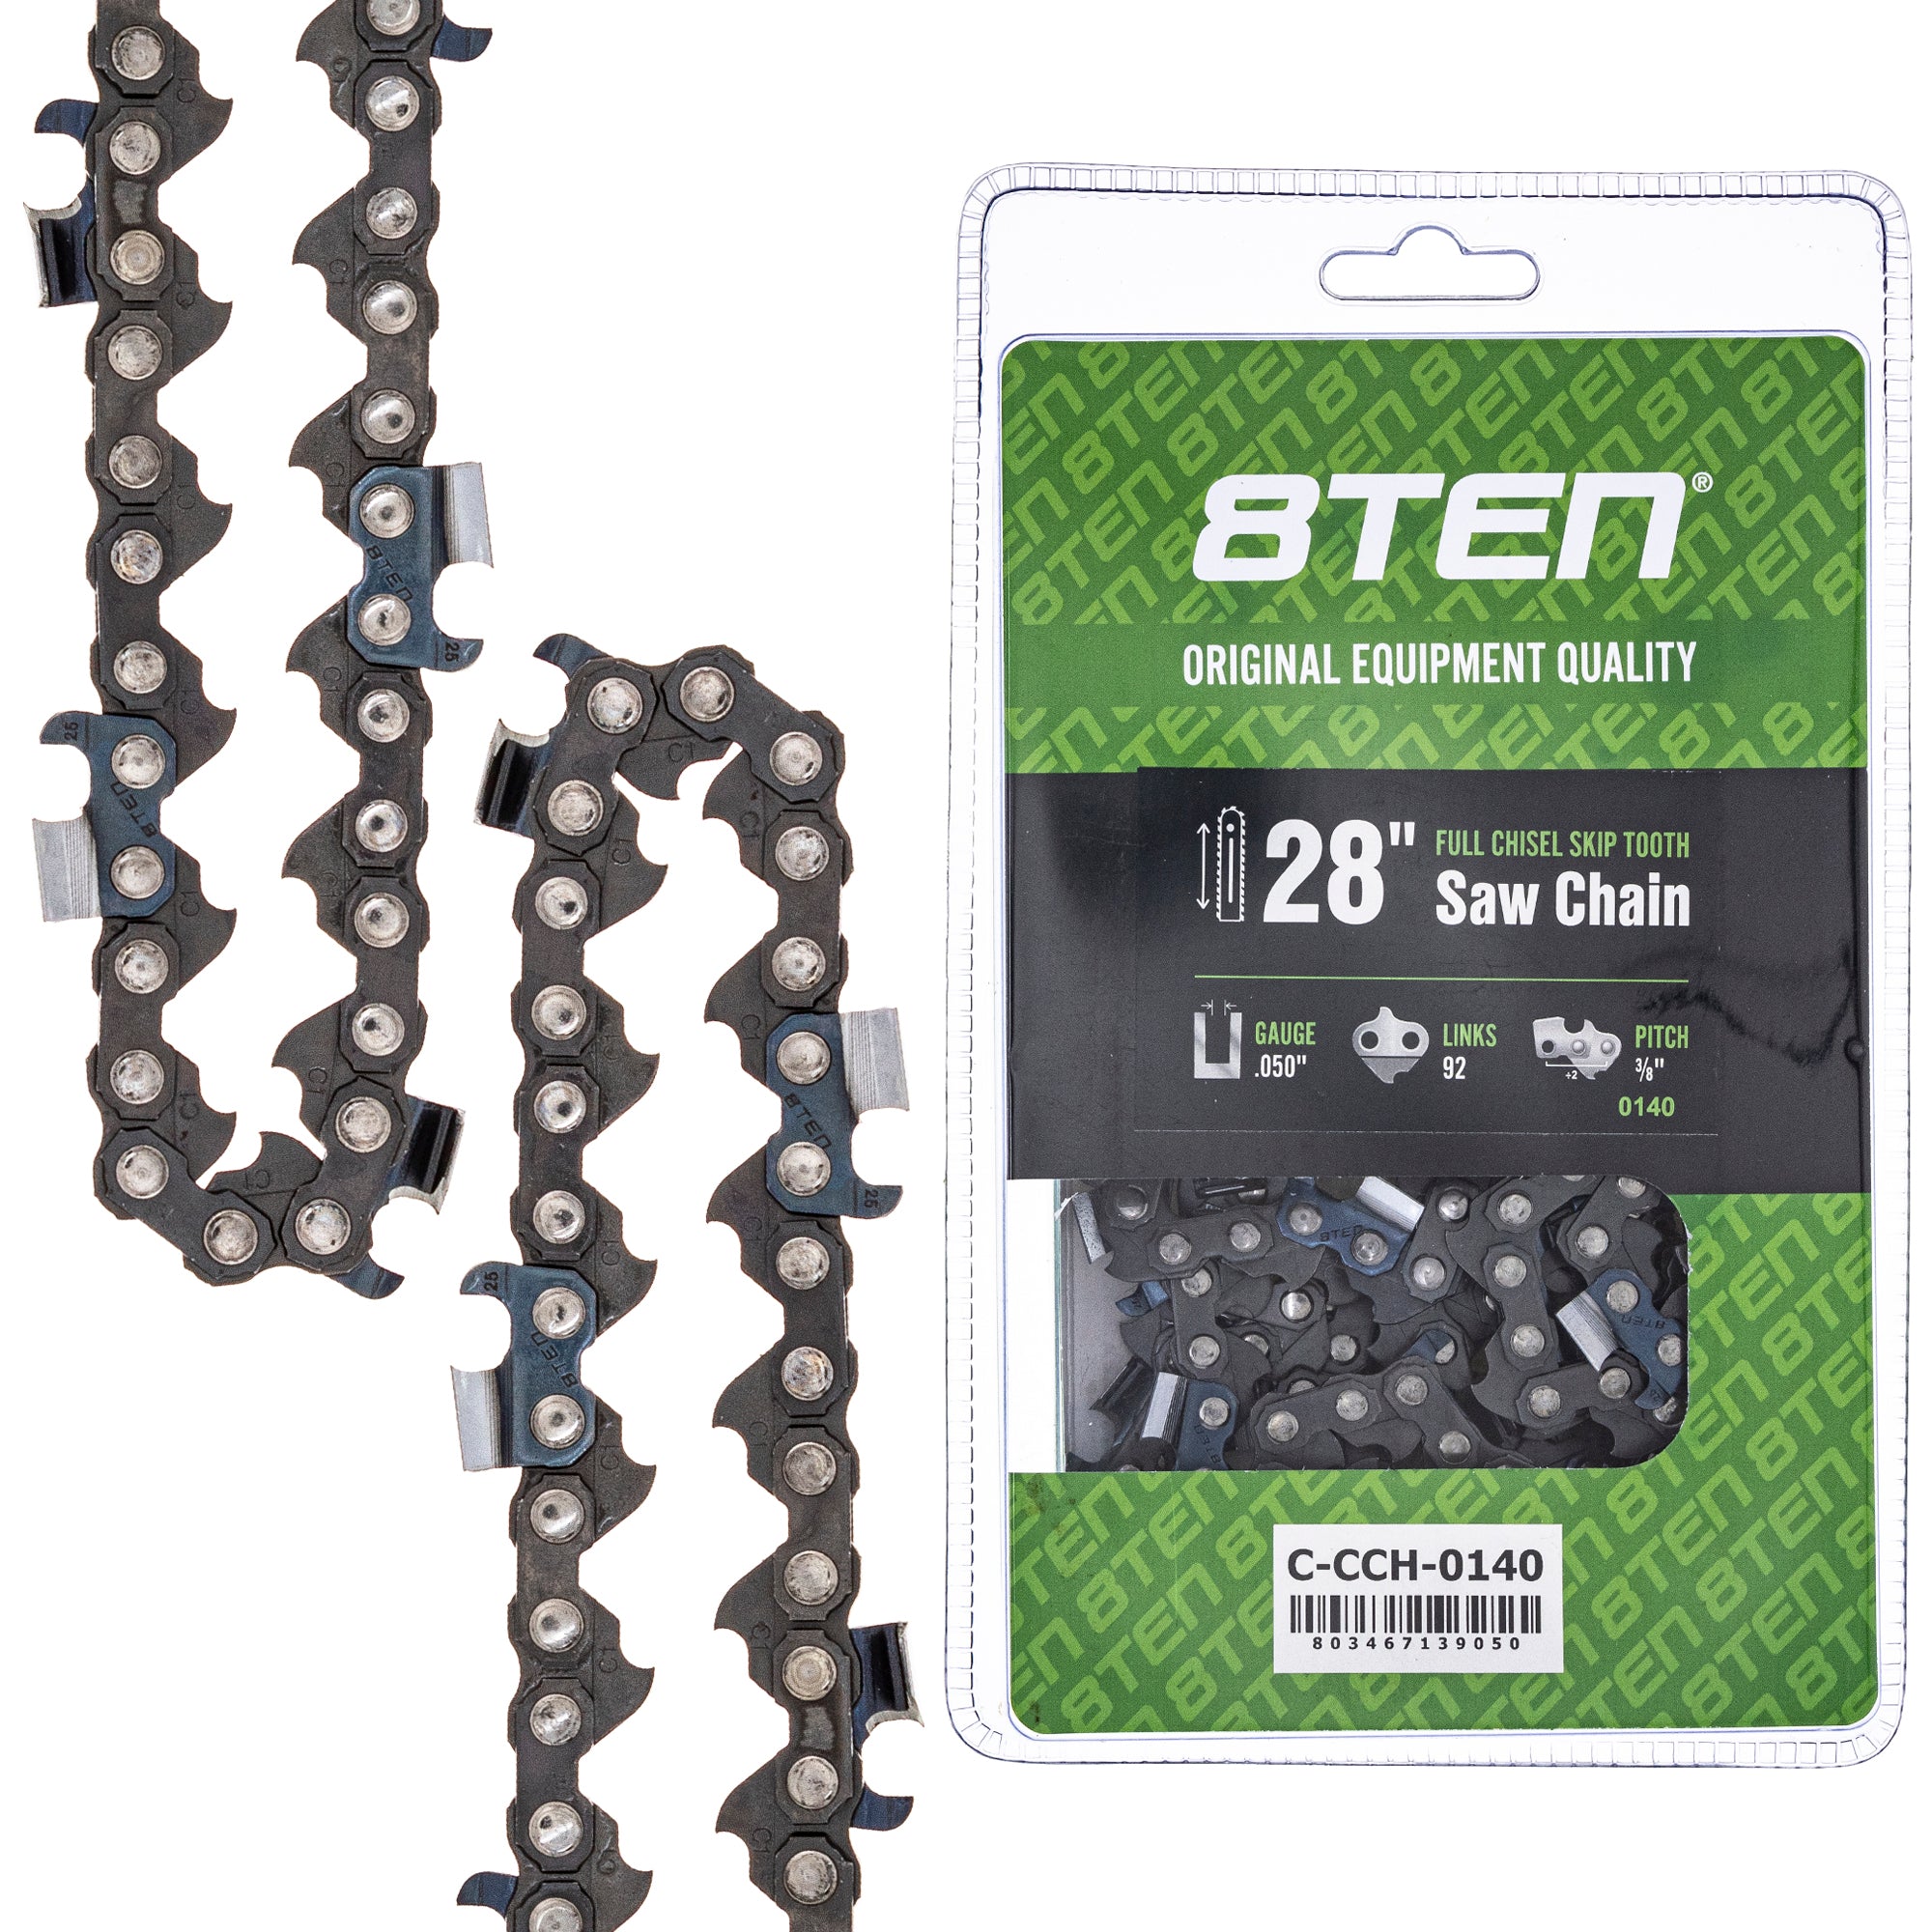 Chainsaw Chain 28 Inch .050 3/8 92DL for zOTHER 8TEN 810-CCC2362H